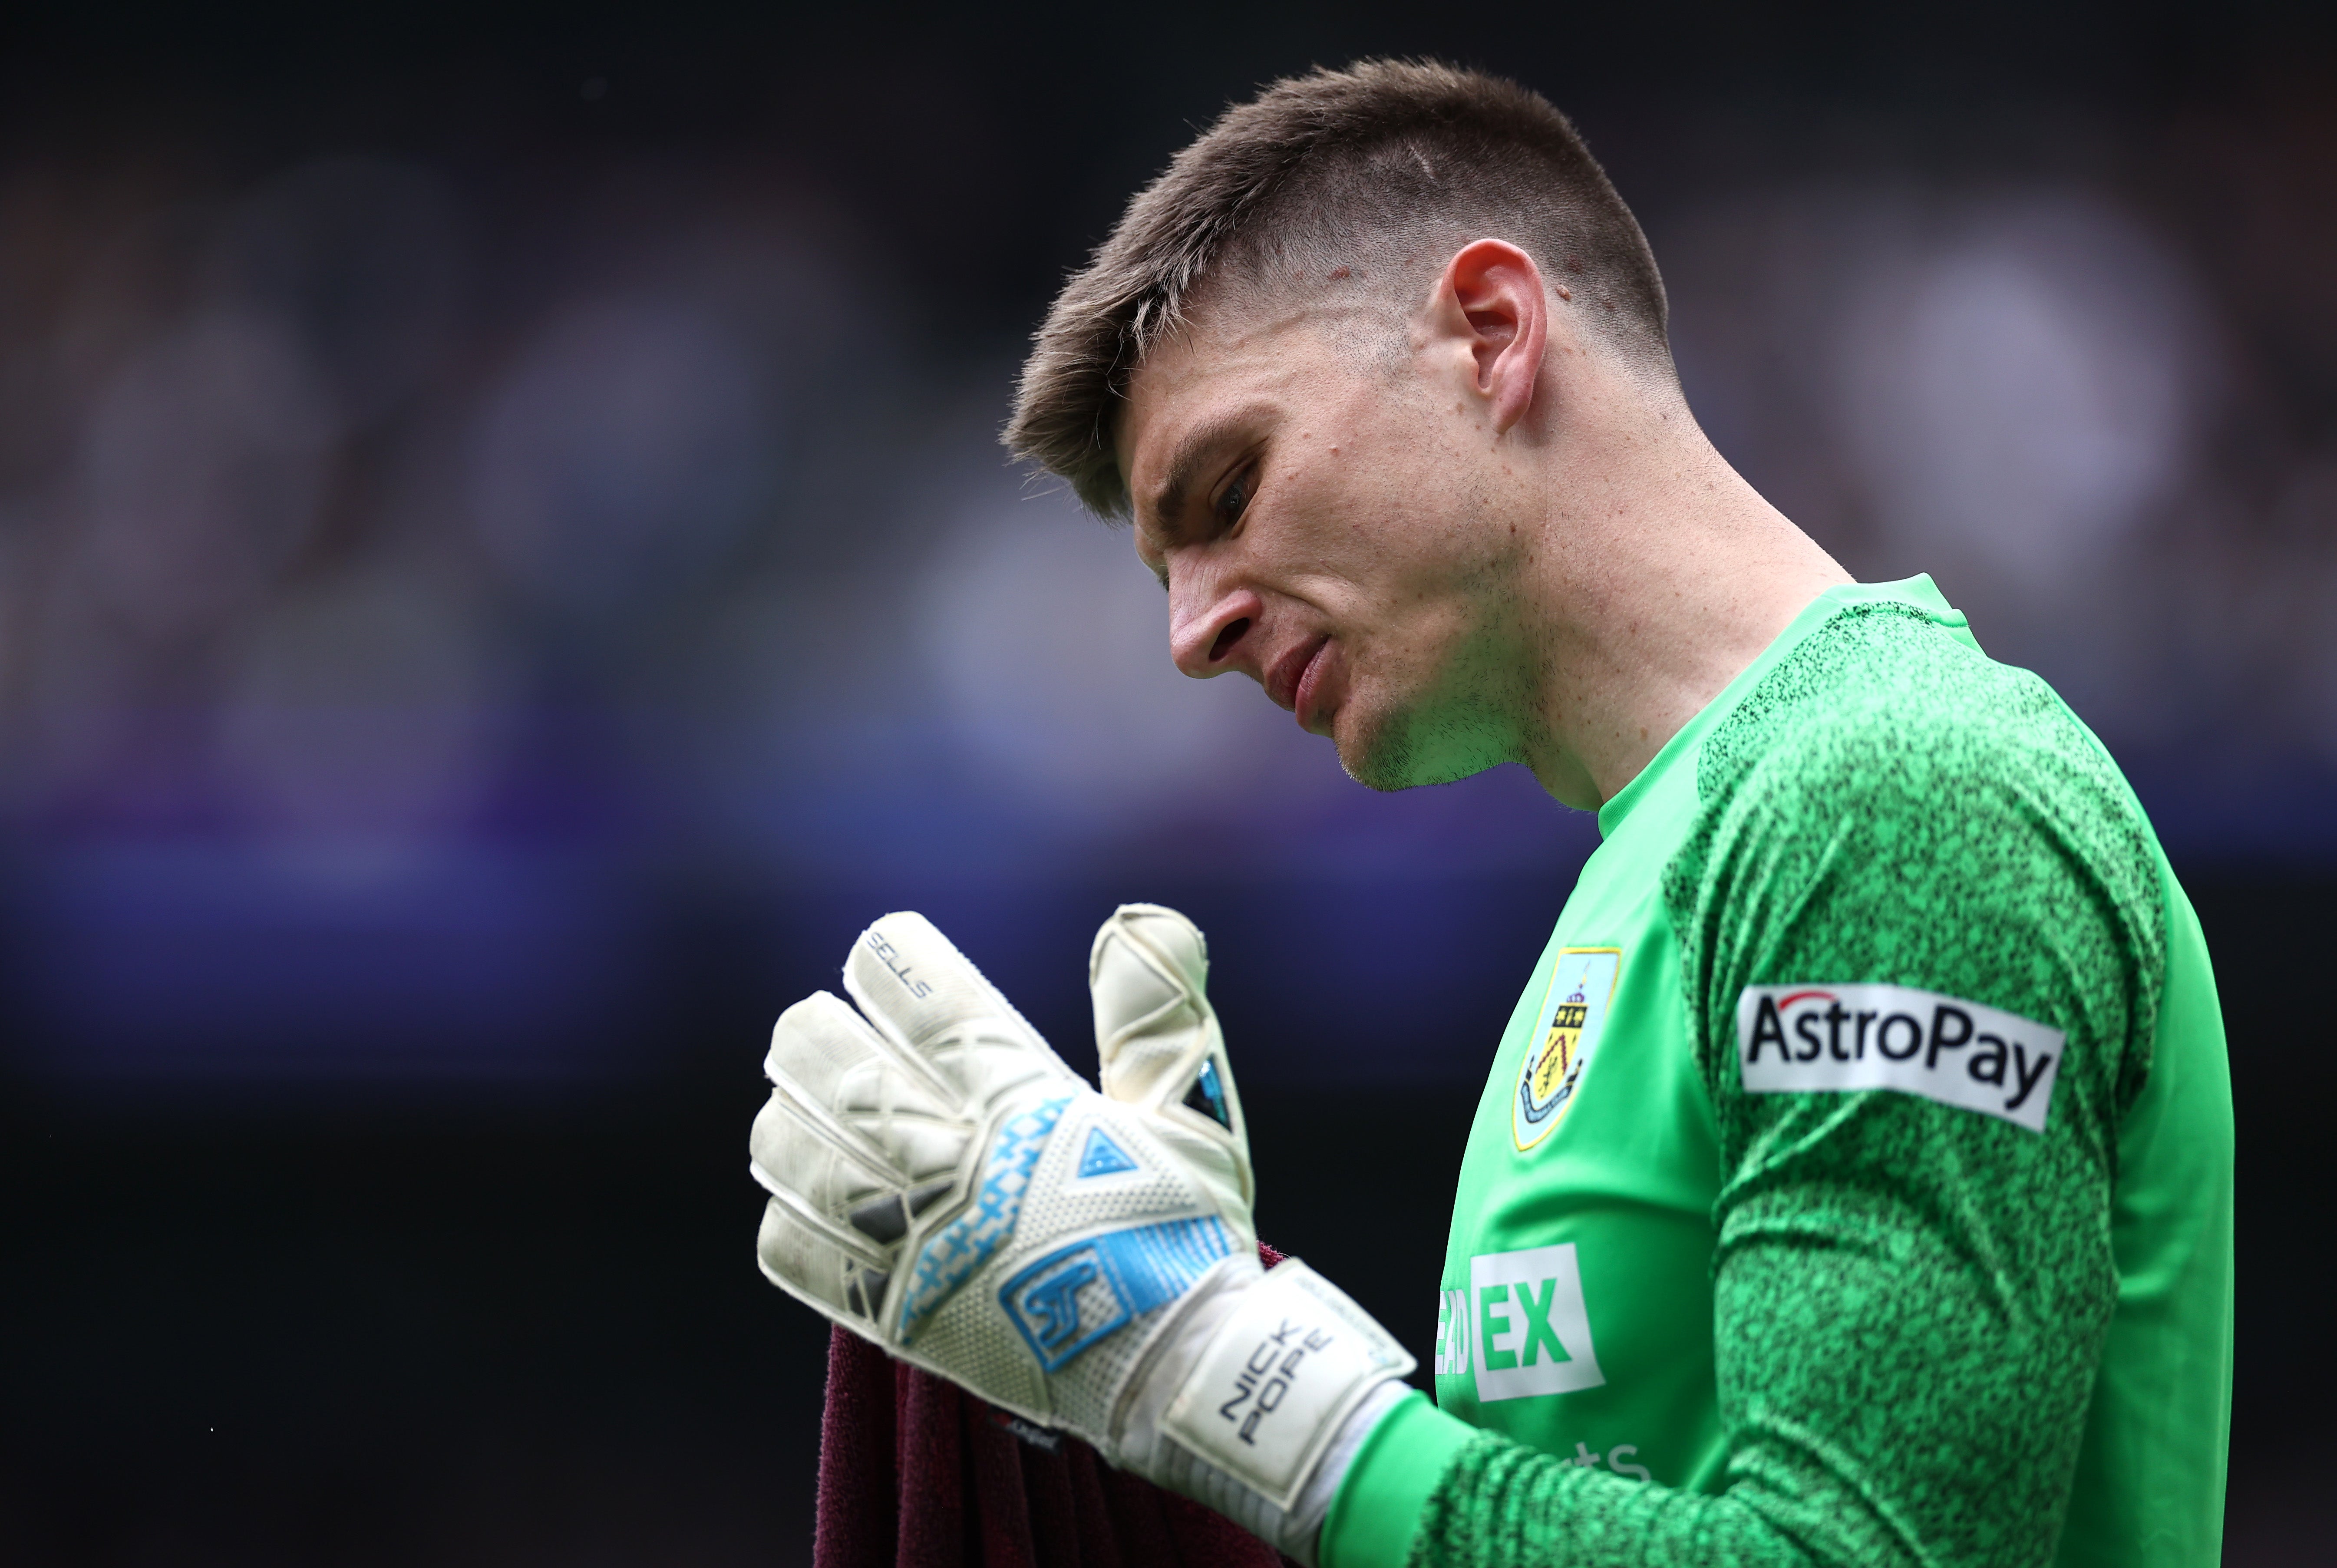 Nick Pope made a valiant attempt to keep Burnley in the Premier League